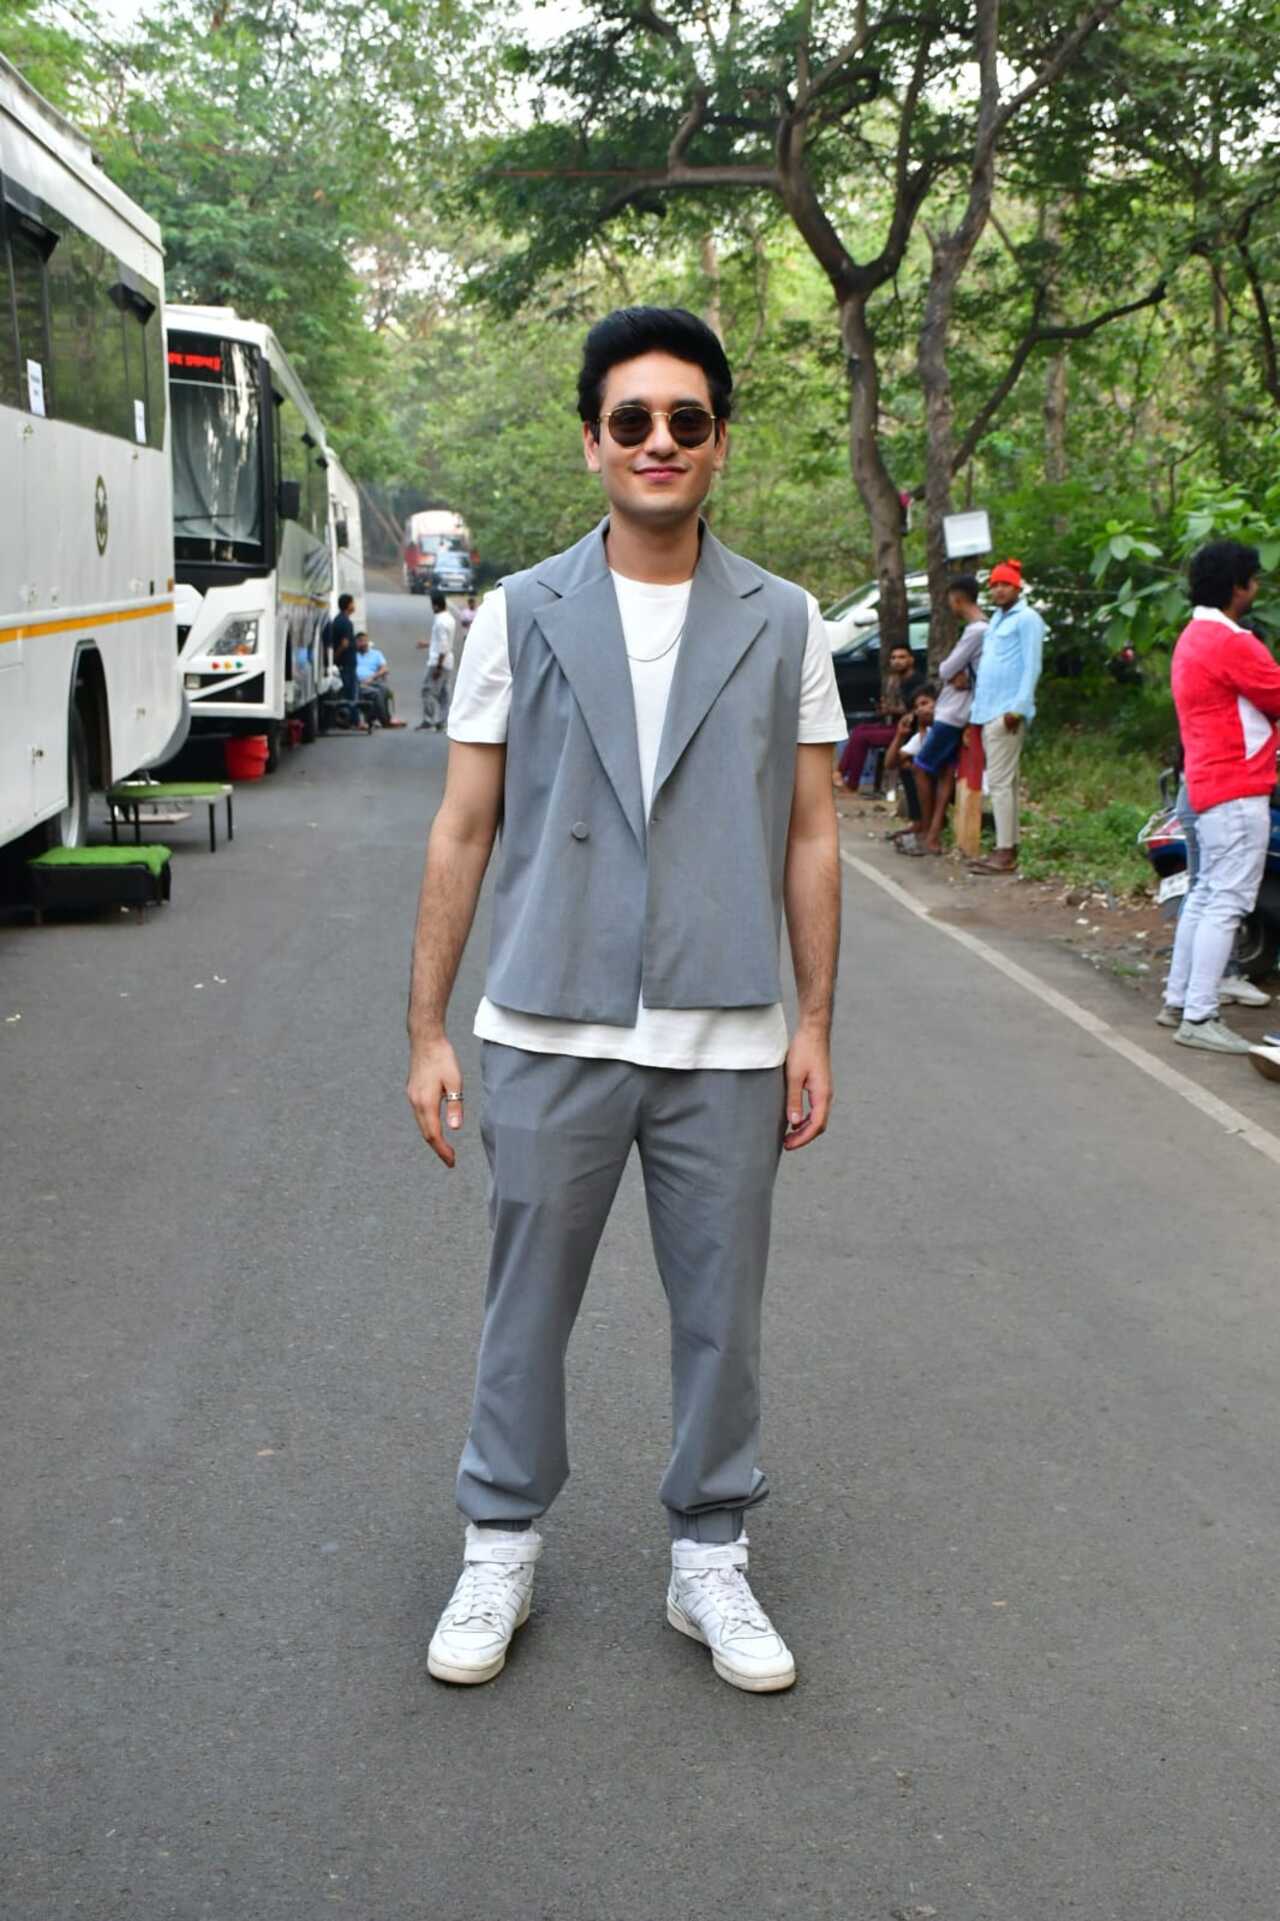 Zeyn Shaw looked dapper in white and grey while promoting Farrey